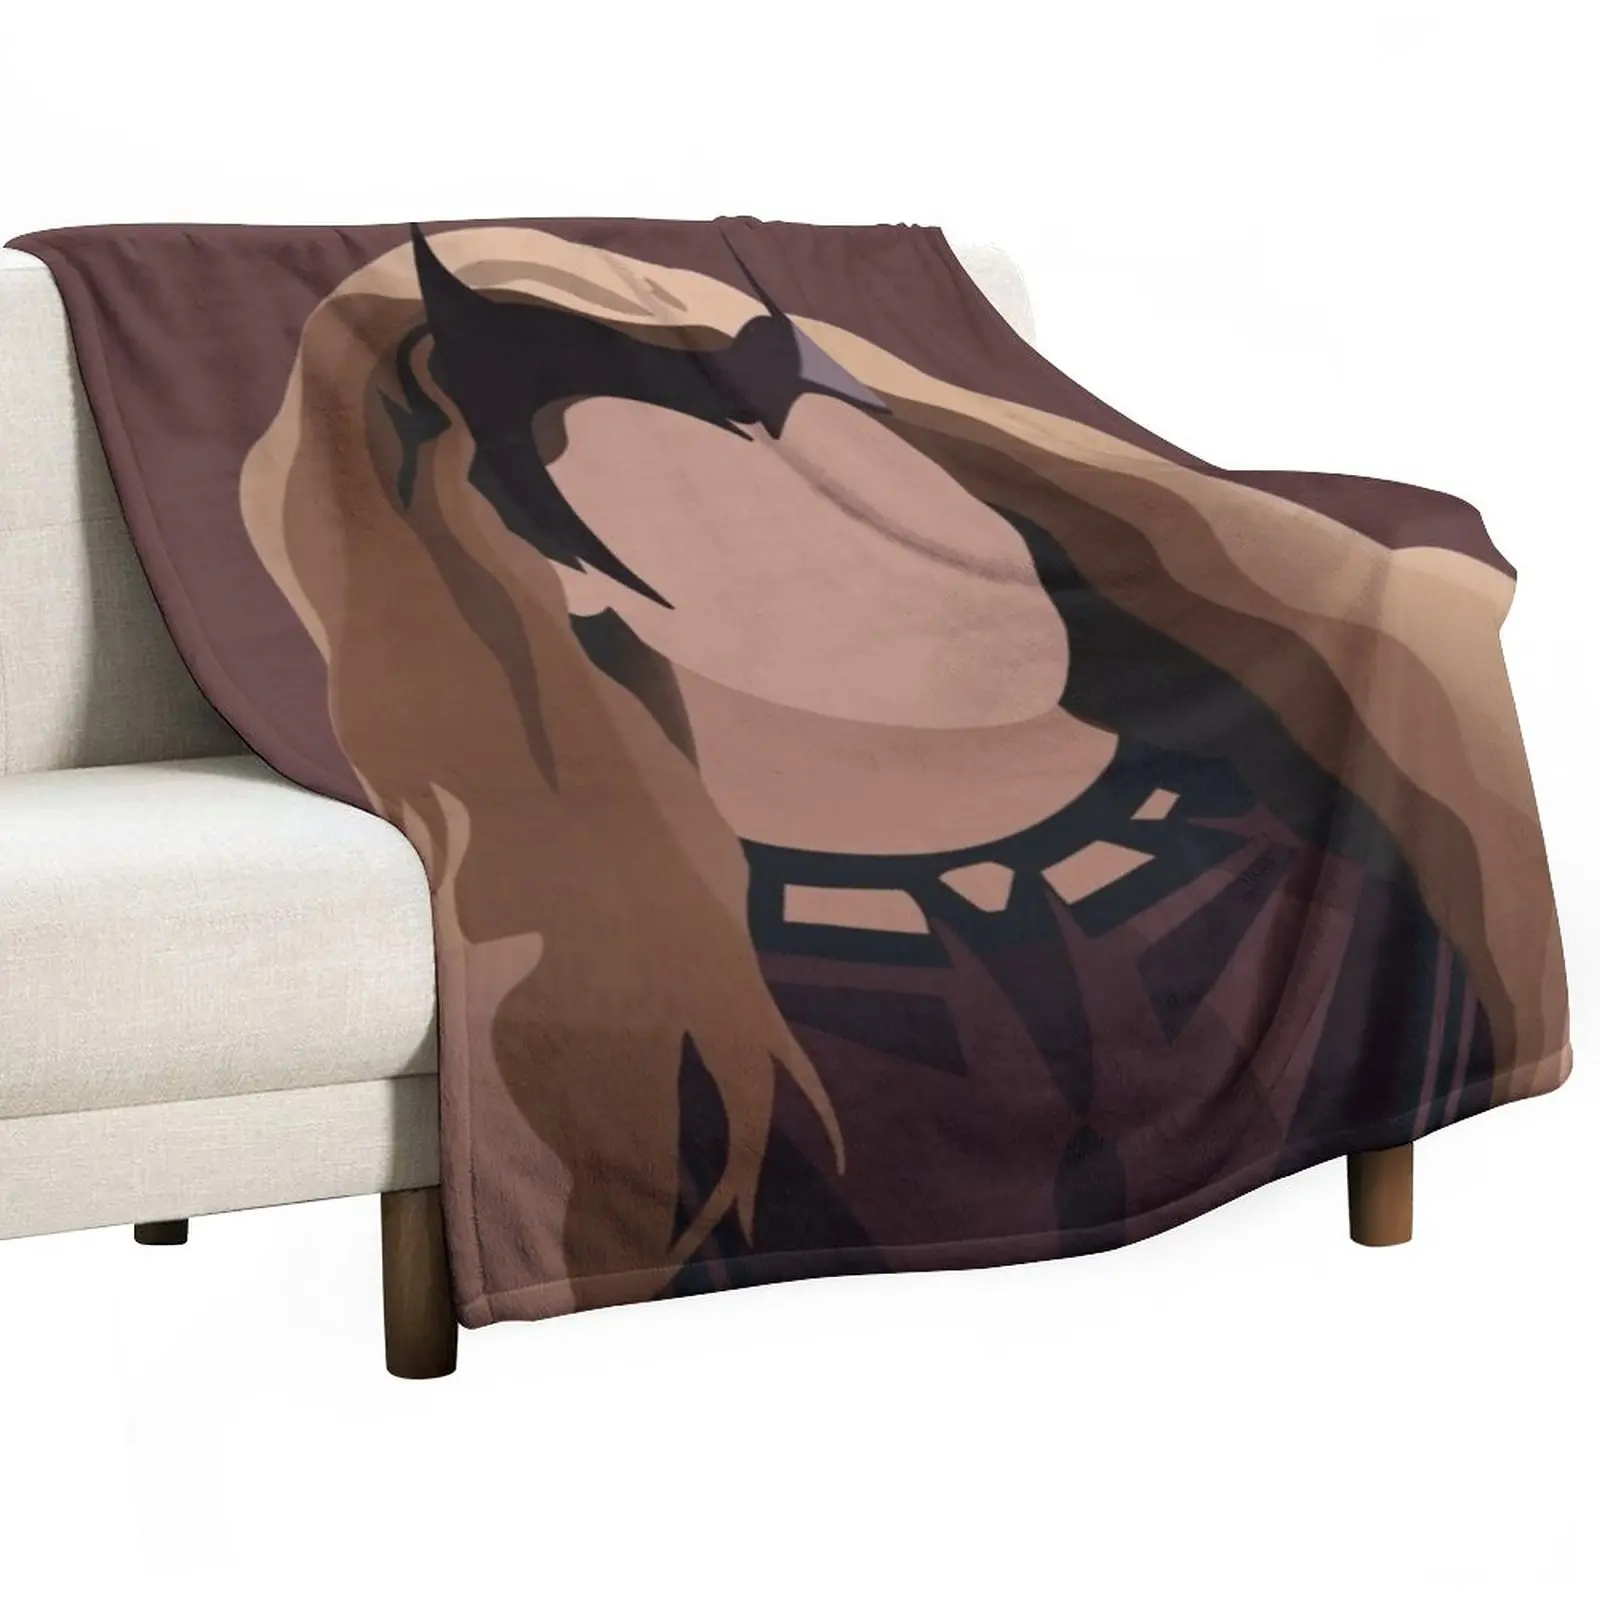 

Wanda Throw Blanket Fluffy Blankets Large blankets and throws Hairy Blanket cosplay anime